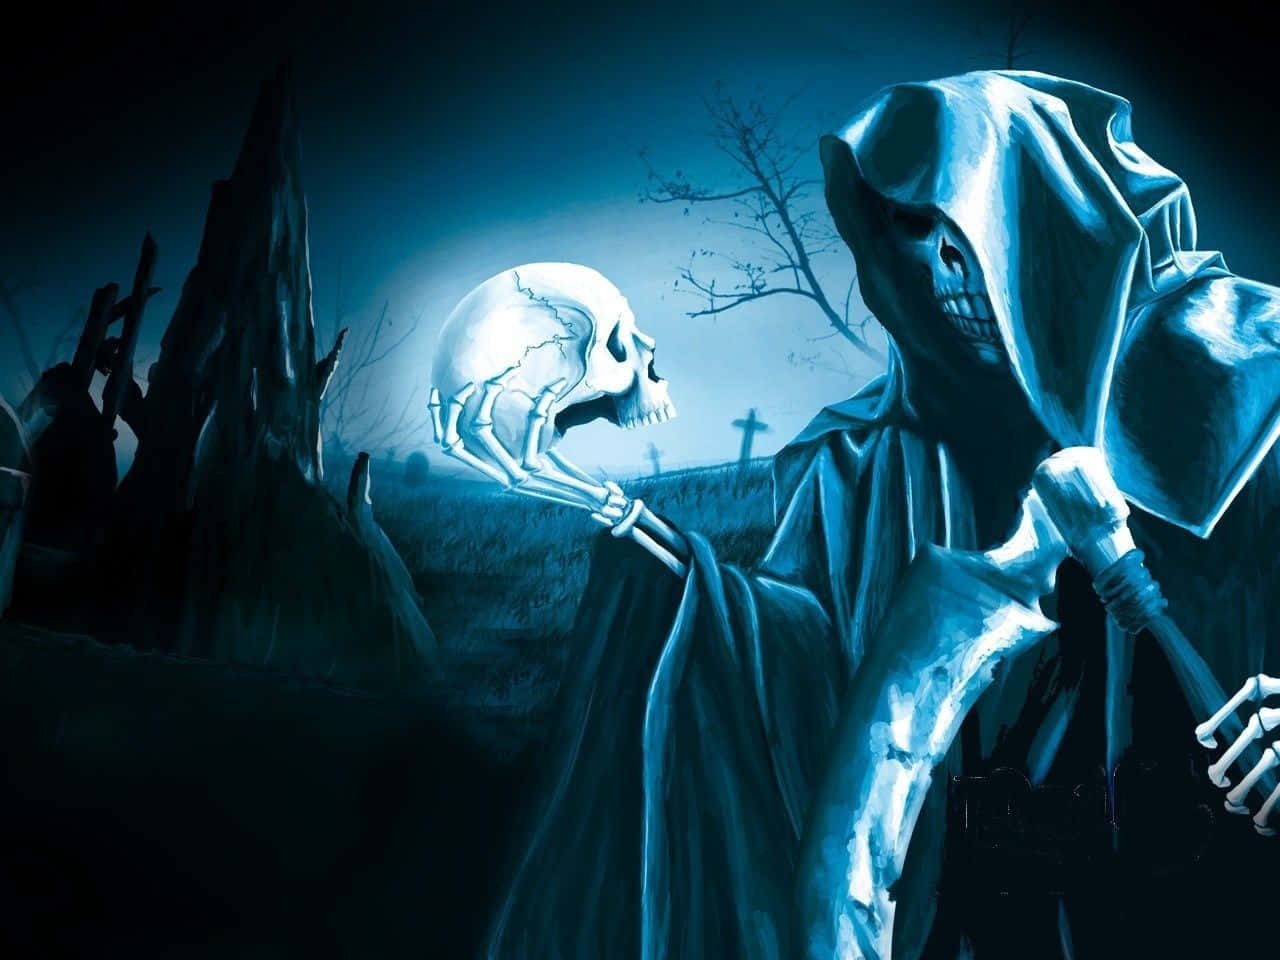 Explore the depths of the underworld with the Grim Reaper